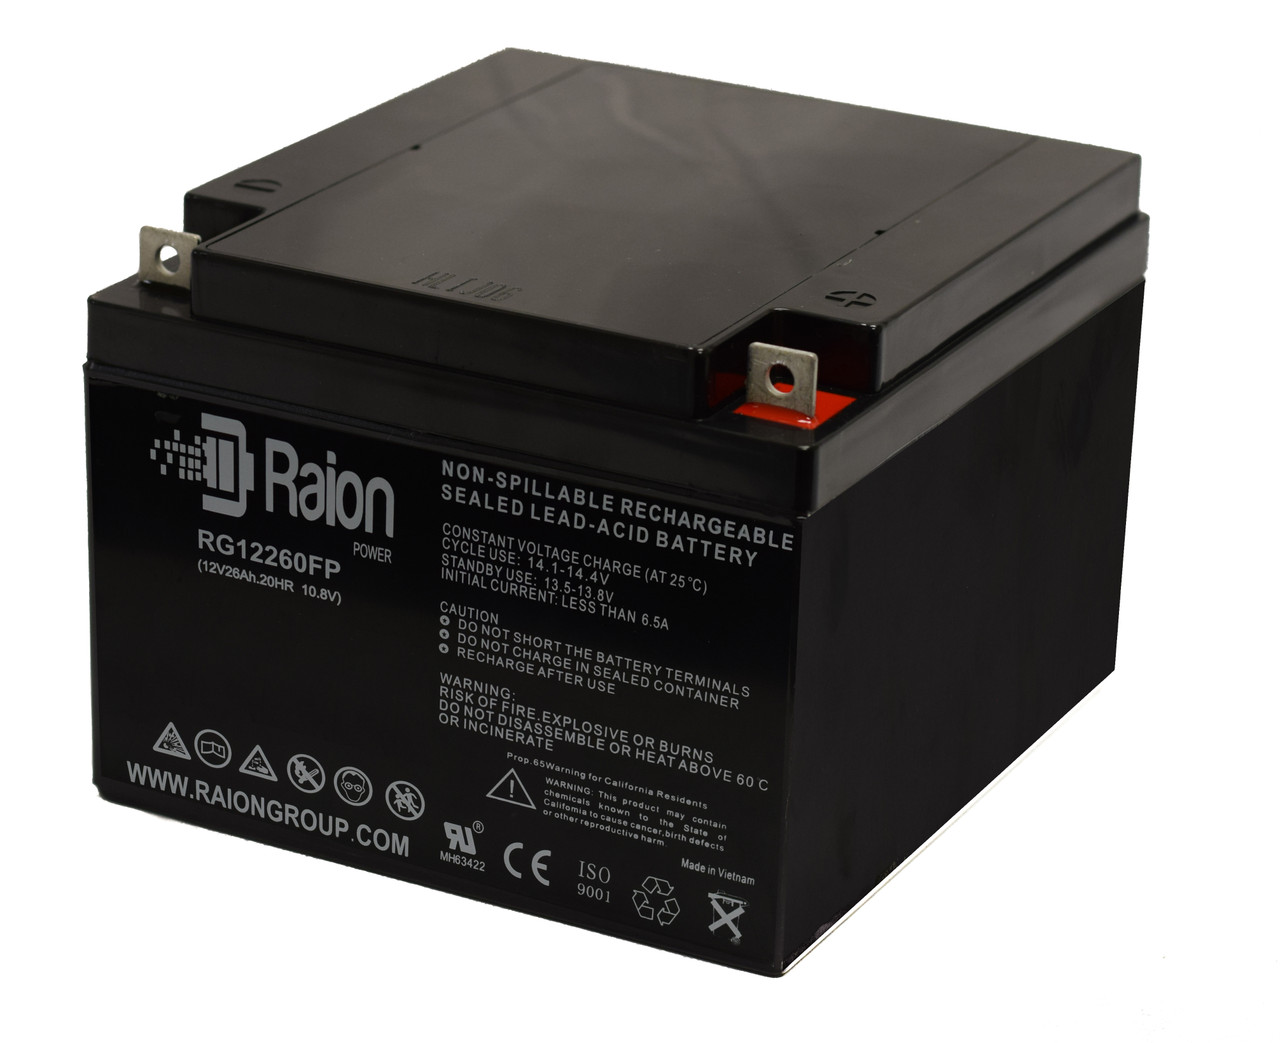 Raion Power Replacement 12V 26Ah Battery for Ocean NP24-12 - 1 Pack